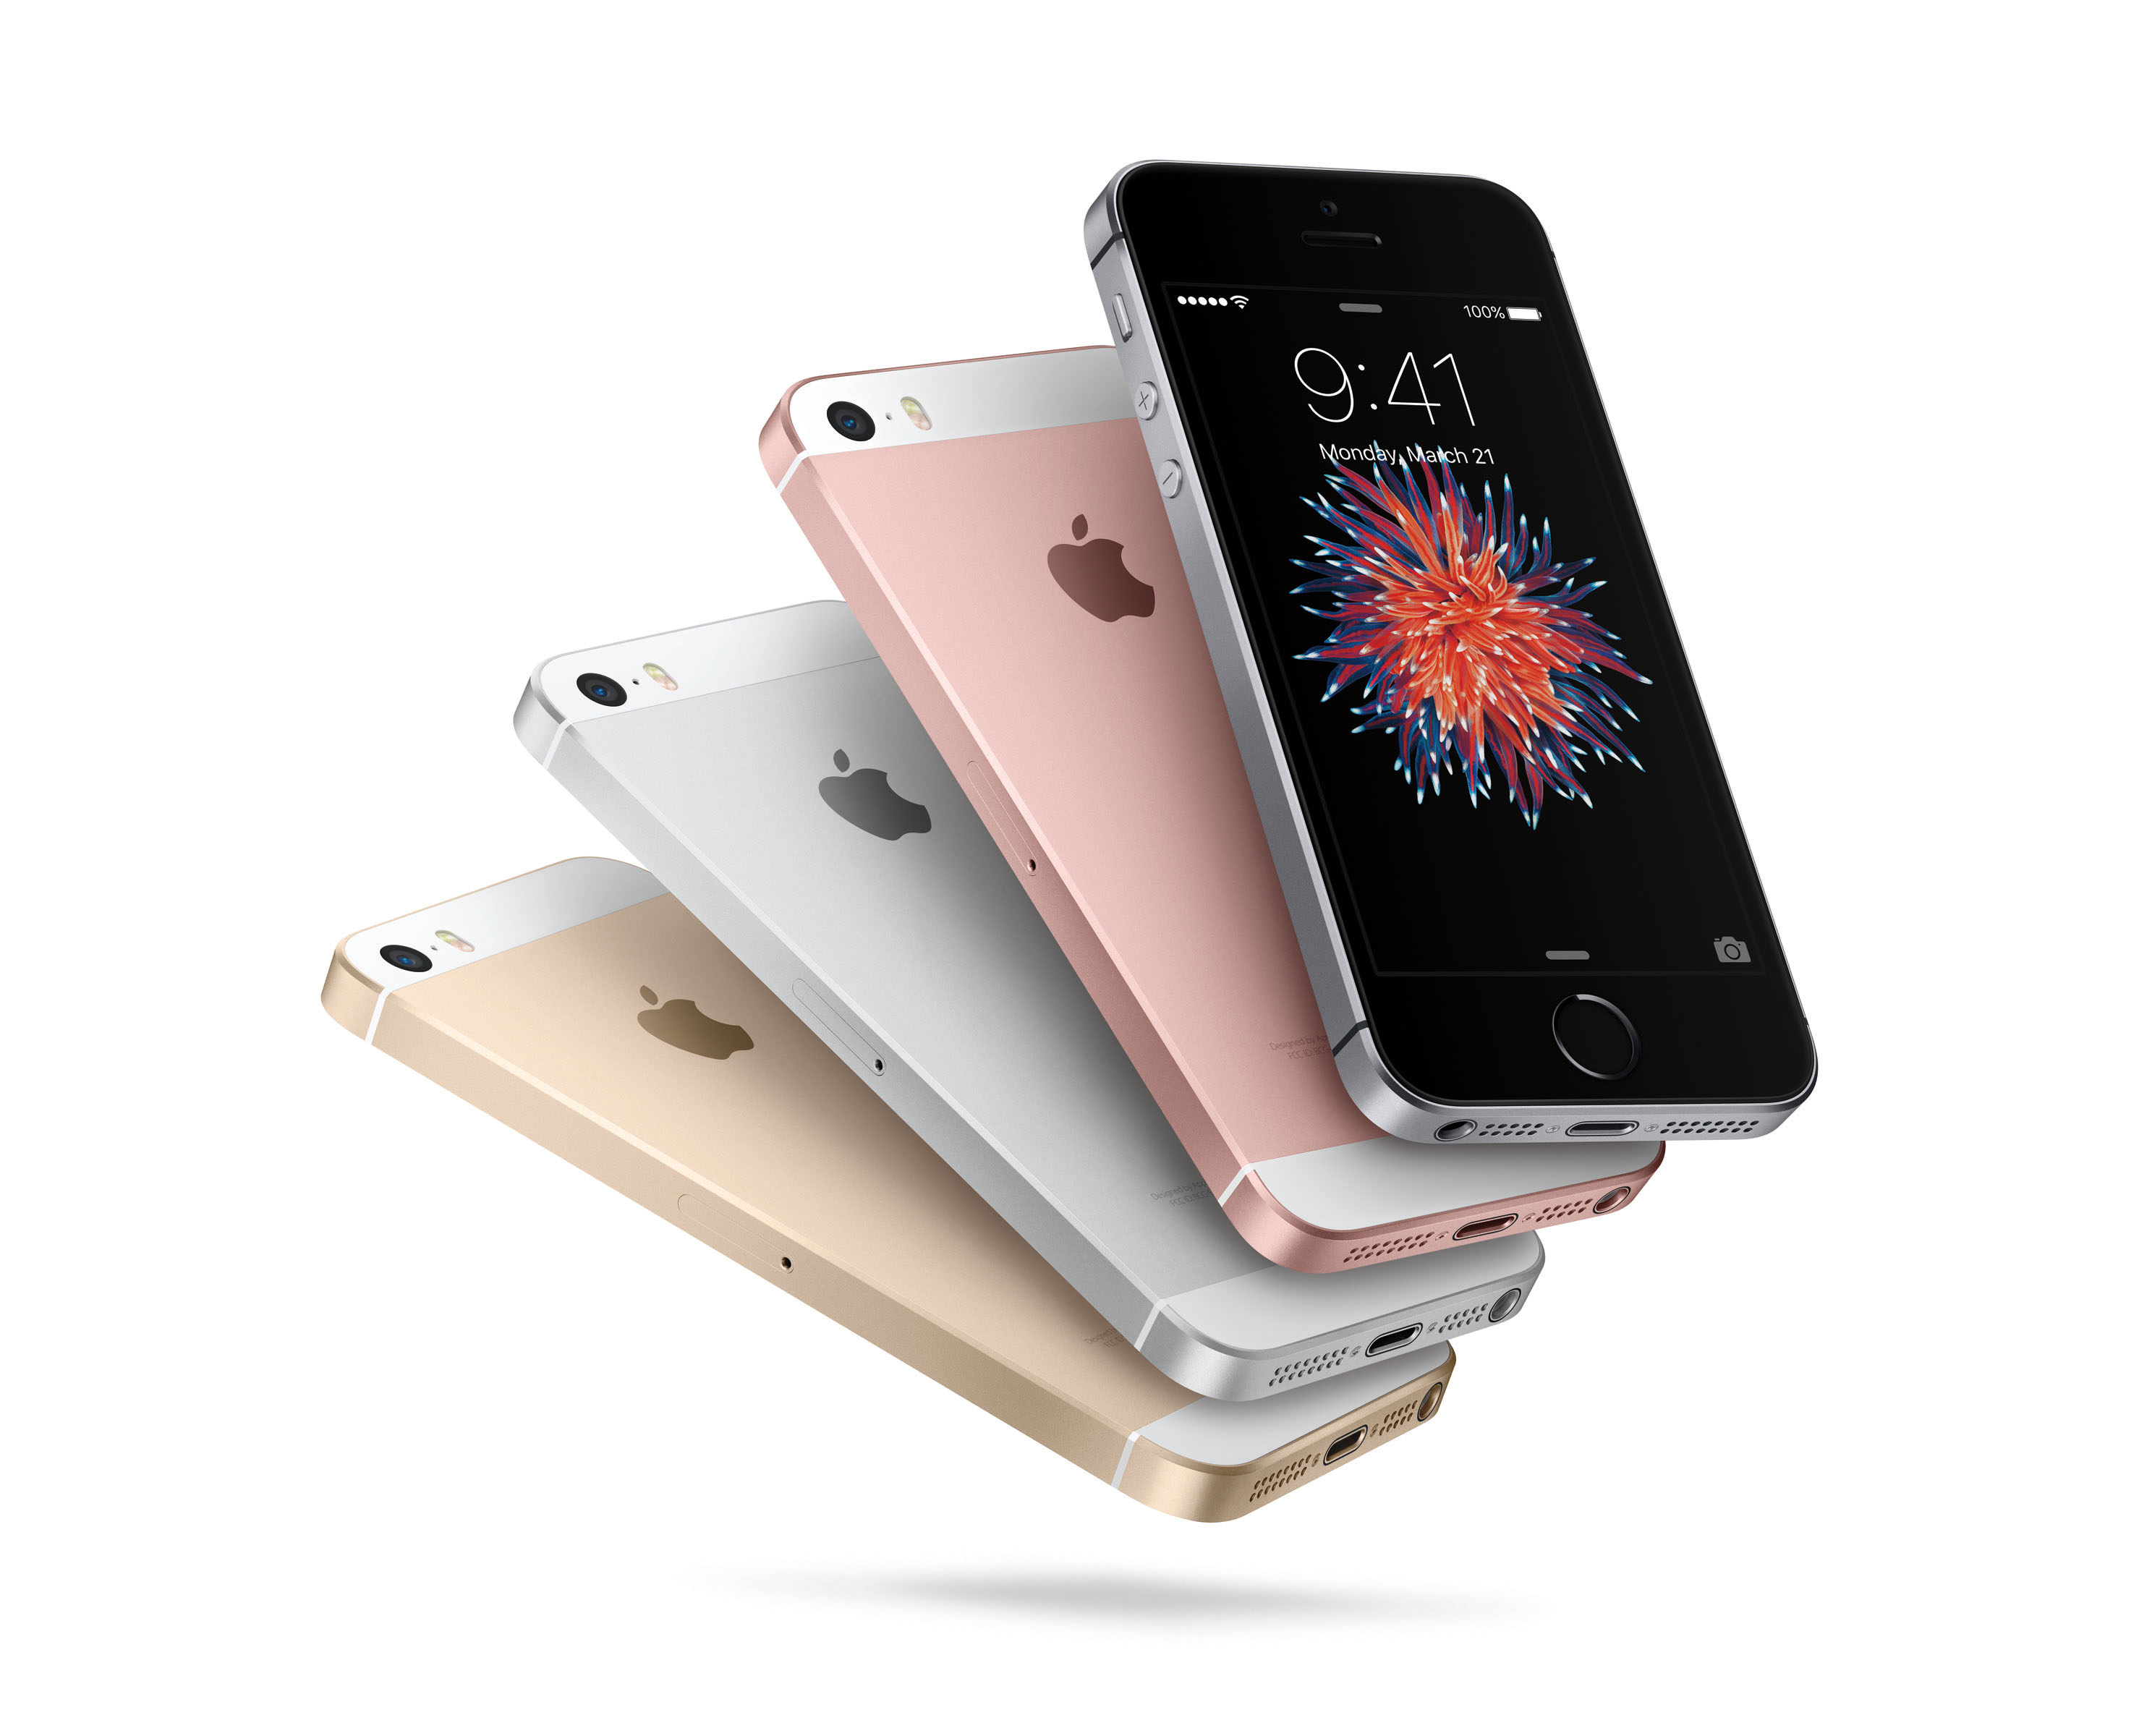 Apple iPhone SE and iPad Pro 9.7″ official pricing revealed